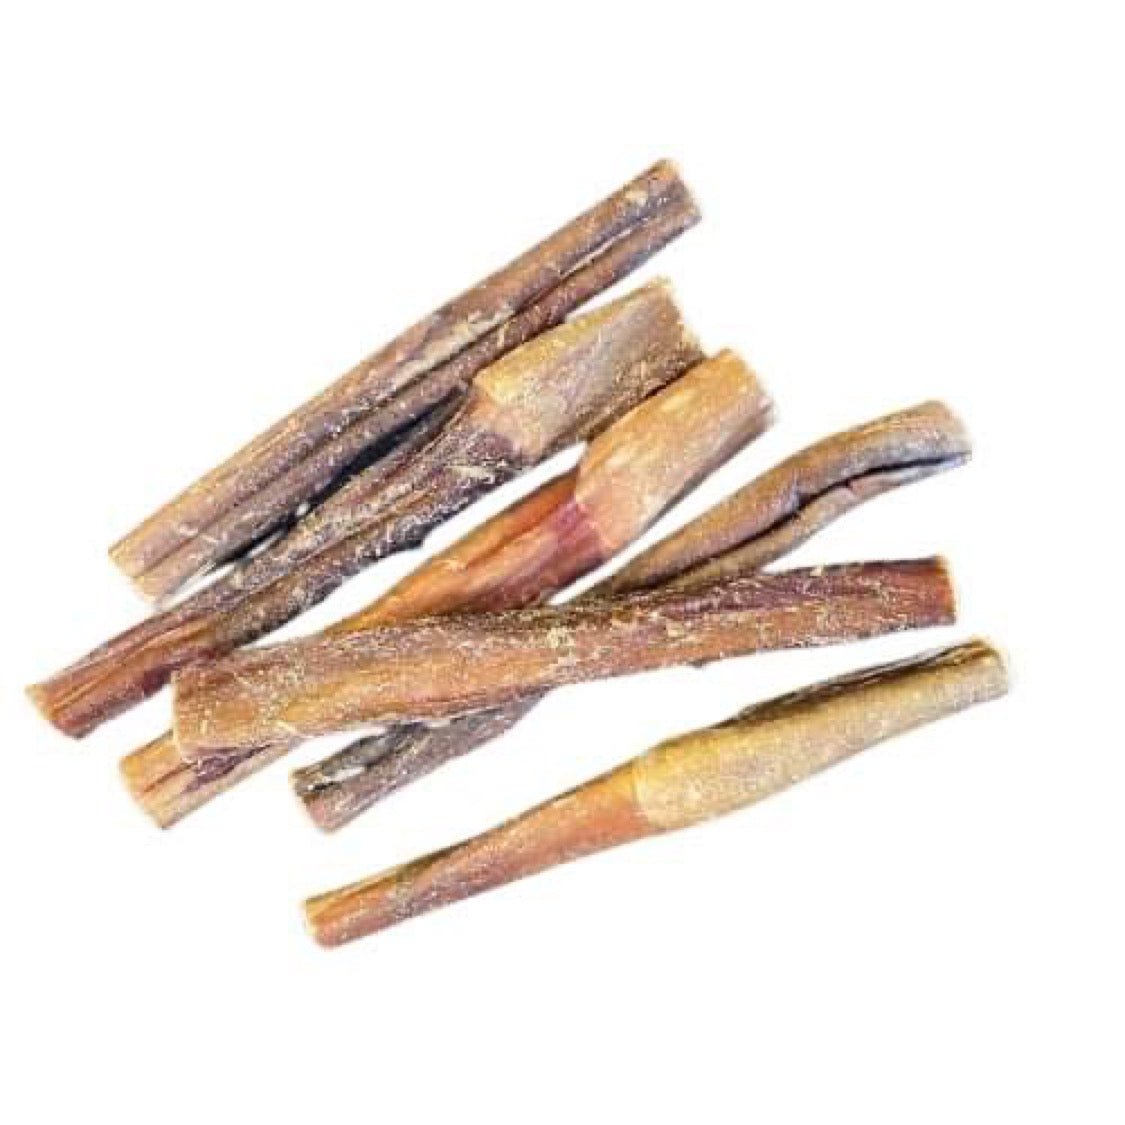 5 x Bull Pizzle - 100% natural, free from raw hide & any hidden nasties.